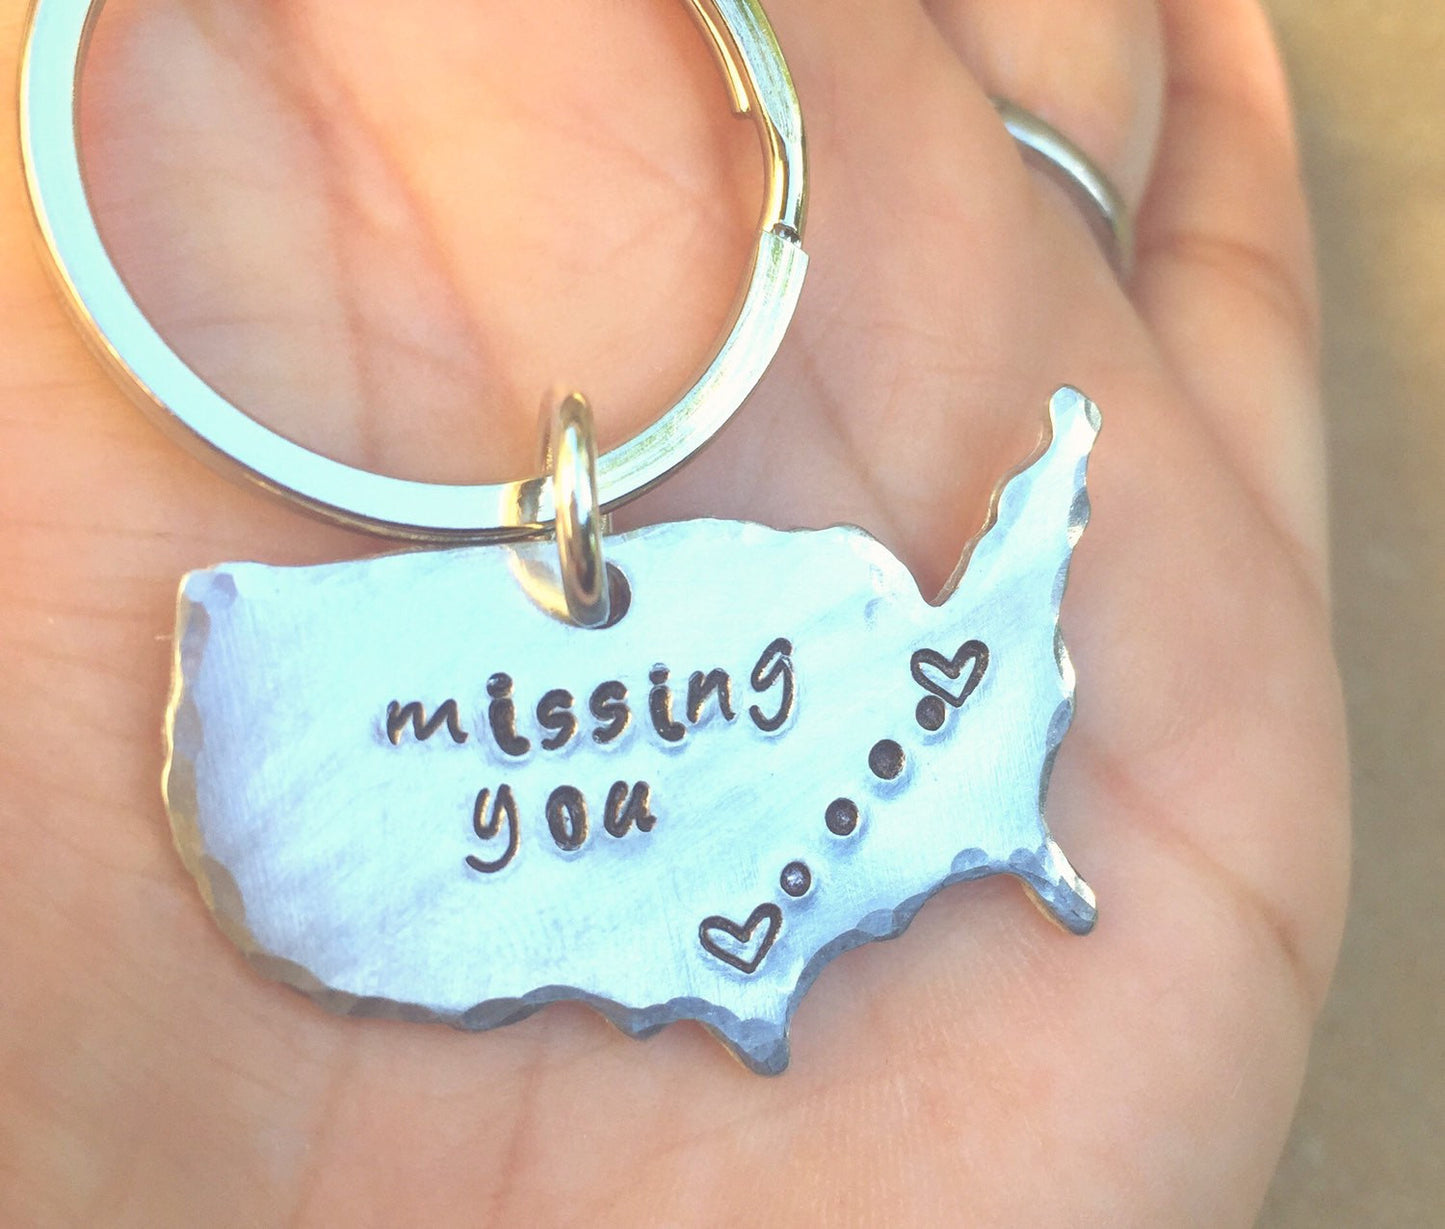 Missing You, Fathers Day Gift, Worth Every Mile, United States Keychain, Gifts for Men, Long Distance  Keychain, Couples Keychain - Natashaaloha, jewelry, bracelets, necklace, keychains, fishing lures, gifts for men, charms, personalized, 